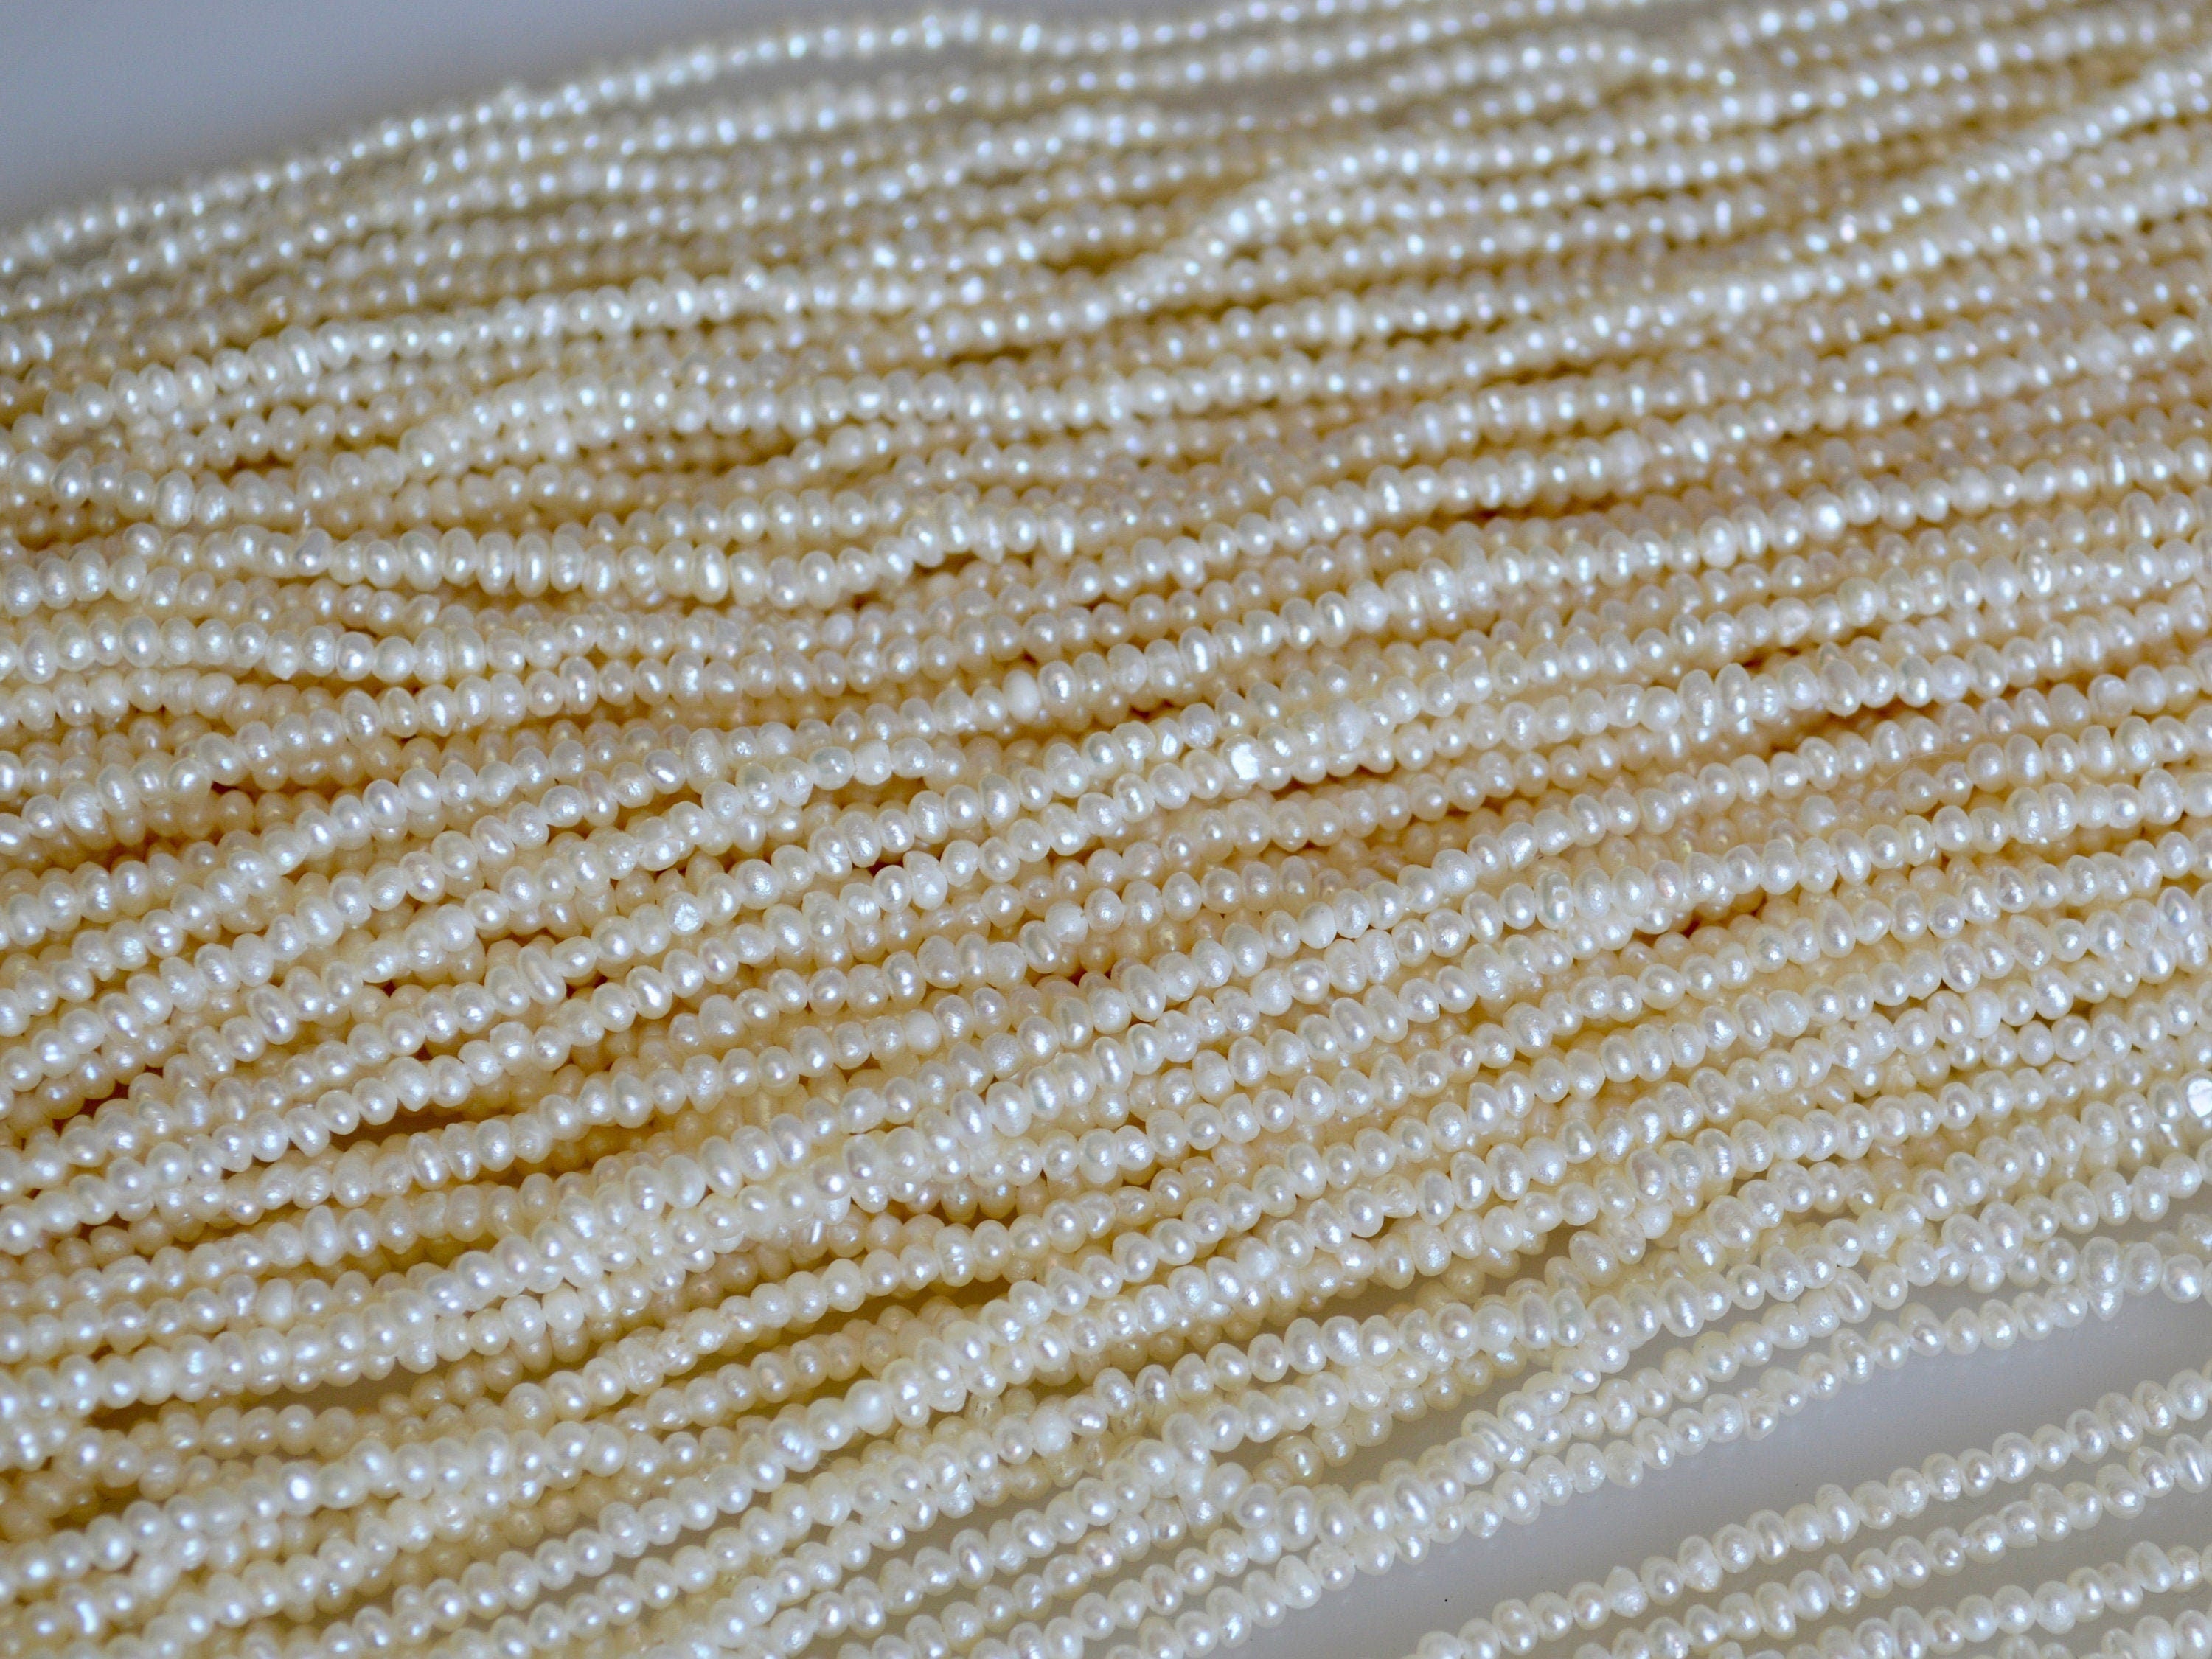 1.5-2.5mm Seed Pearls, Fresh Water Button Pearl,white Small Pearl Bead,  Genuine Natural Color Tiny Pearl Bead Supplies PB496 